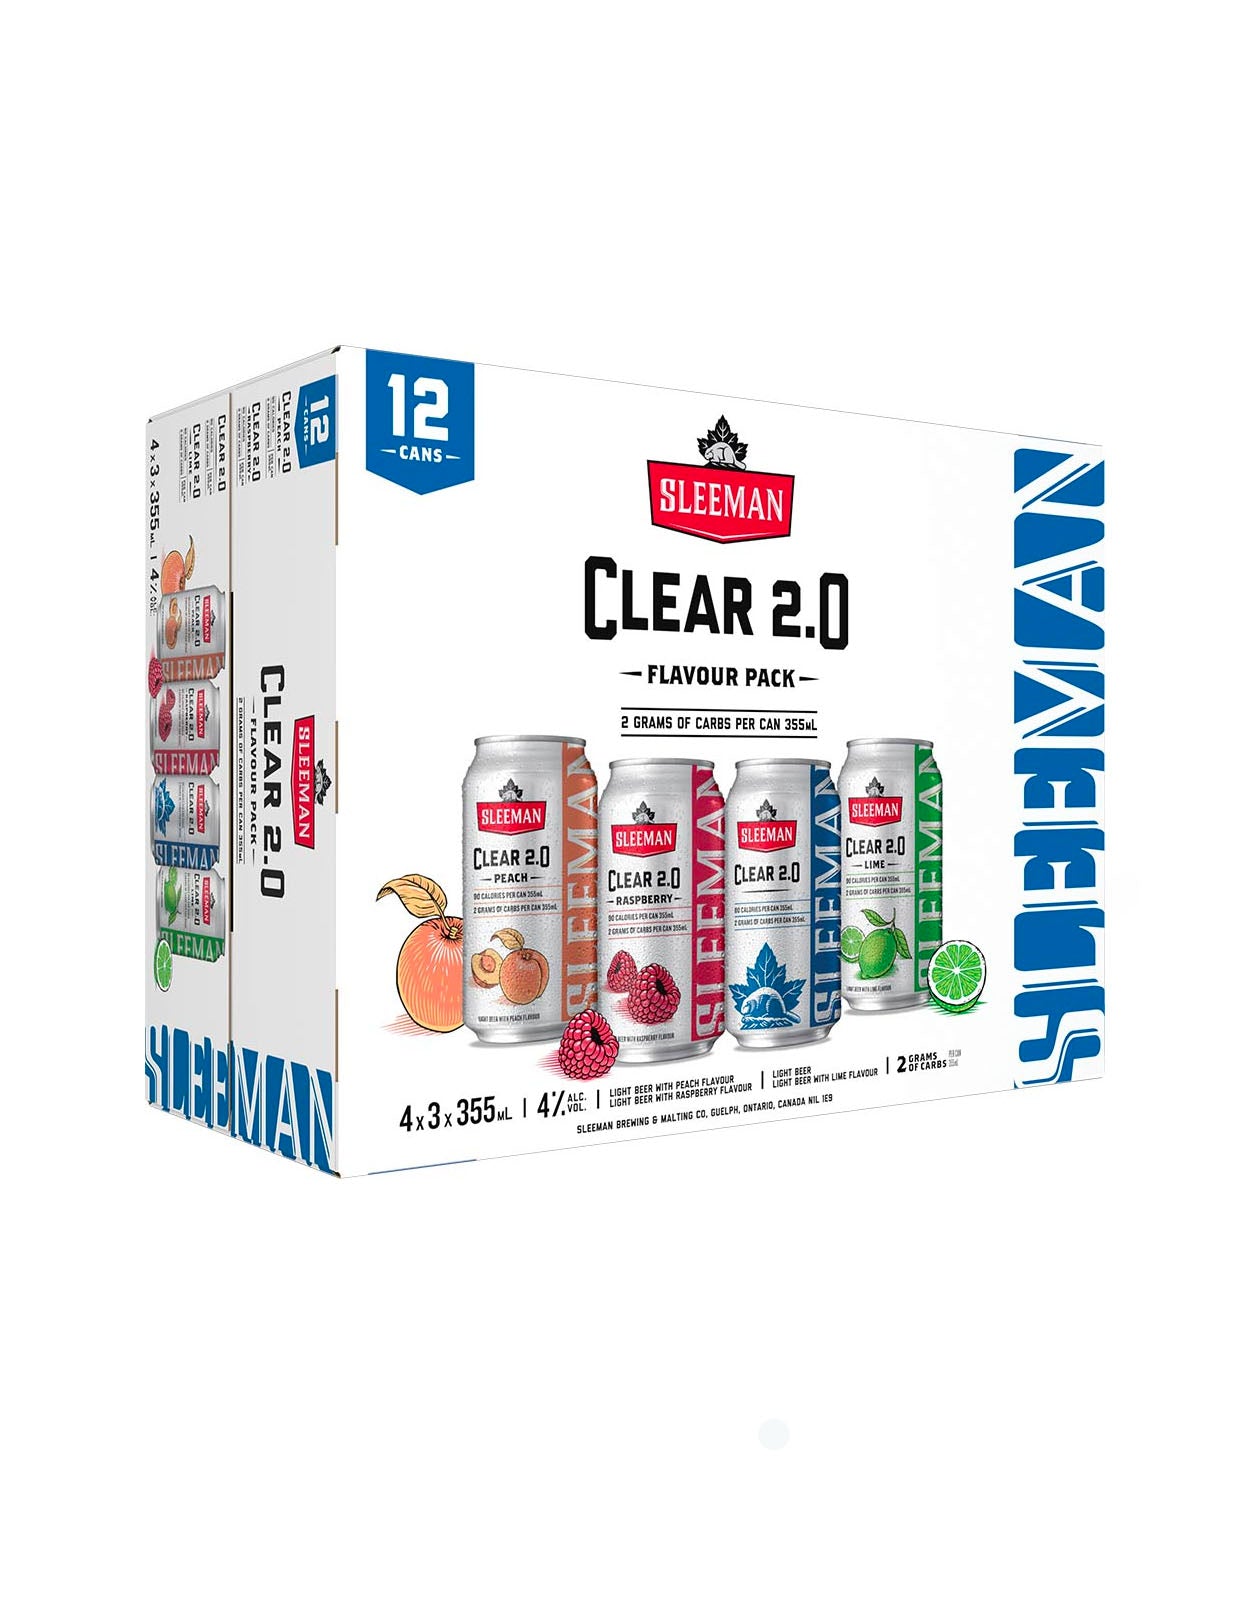 Sleeman Clear 2.0 Flavour Pack 355 ml - 12 Cans